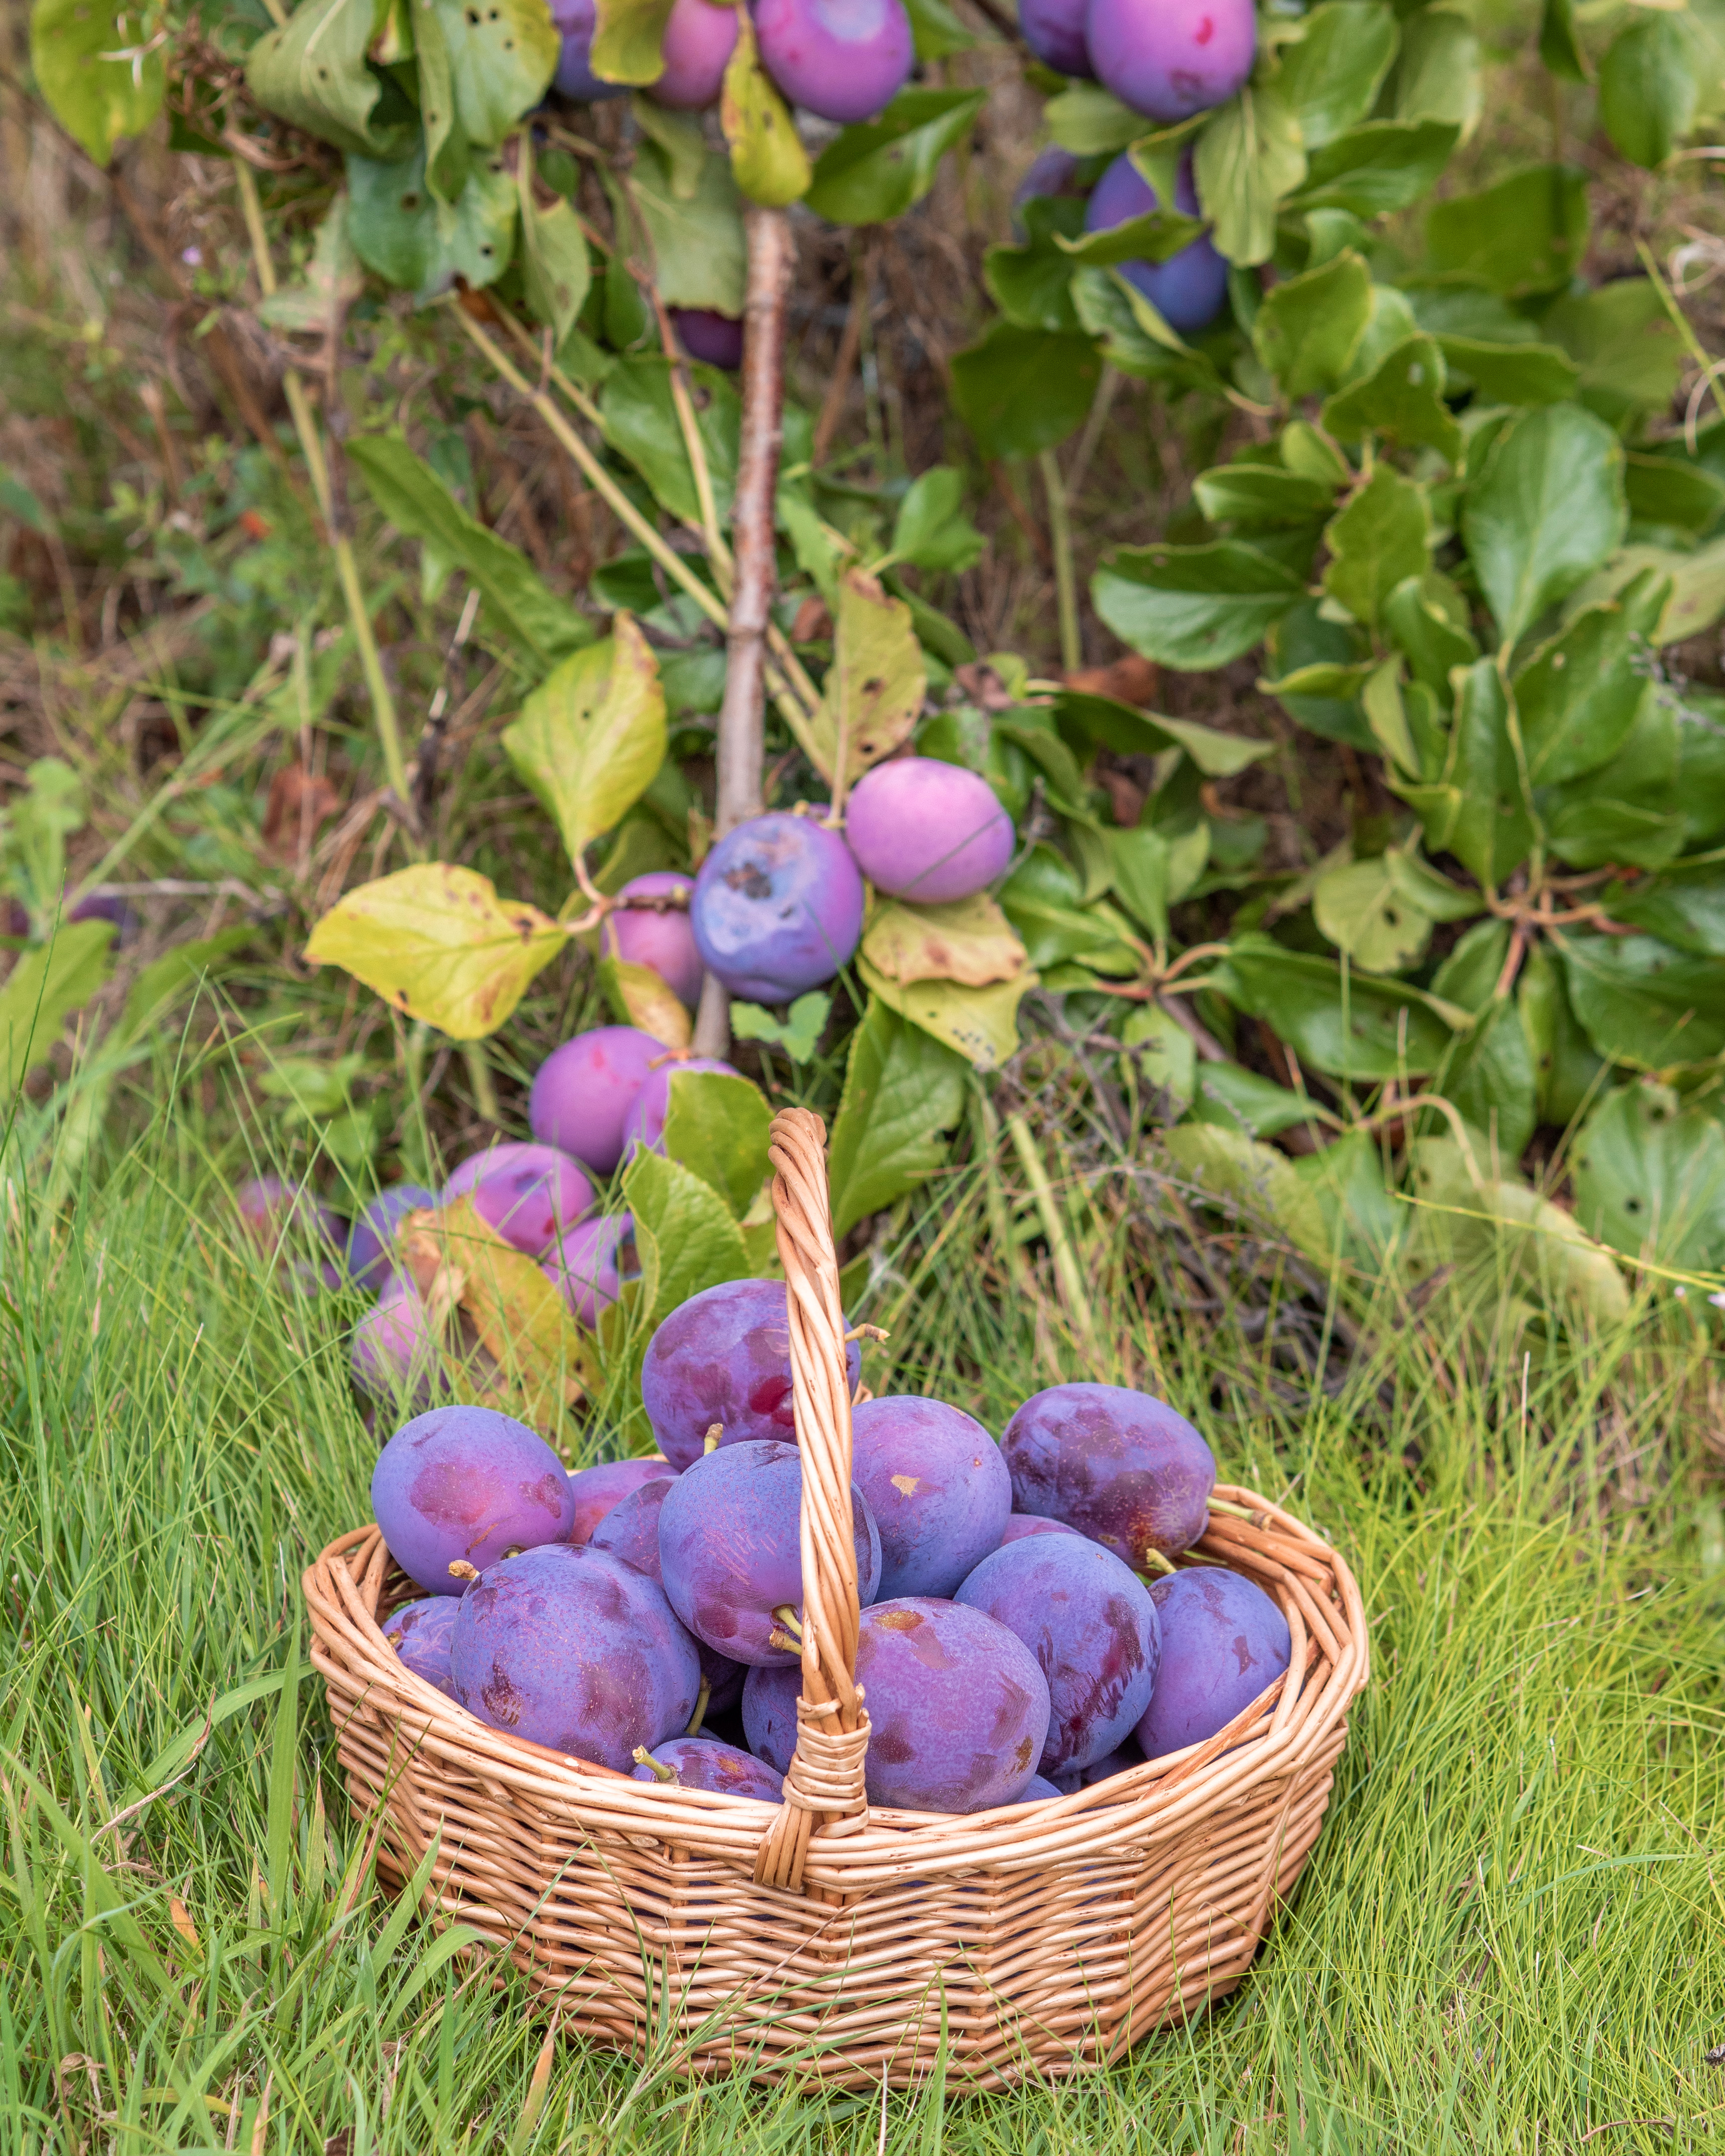 Plum Picking Orchard PYO. A straw basket full of bright purple plums settled amongst green grass.